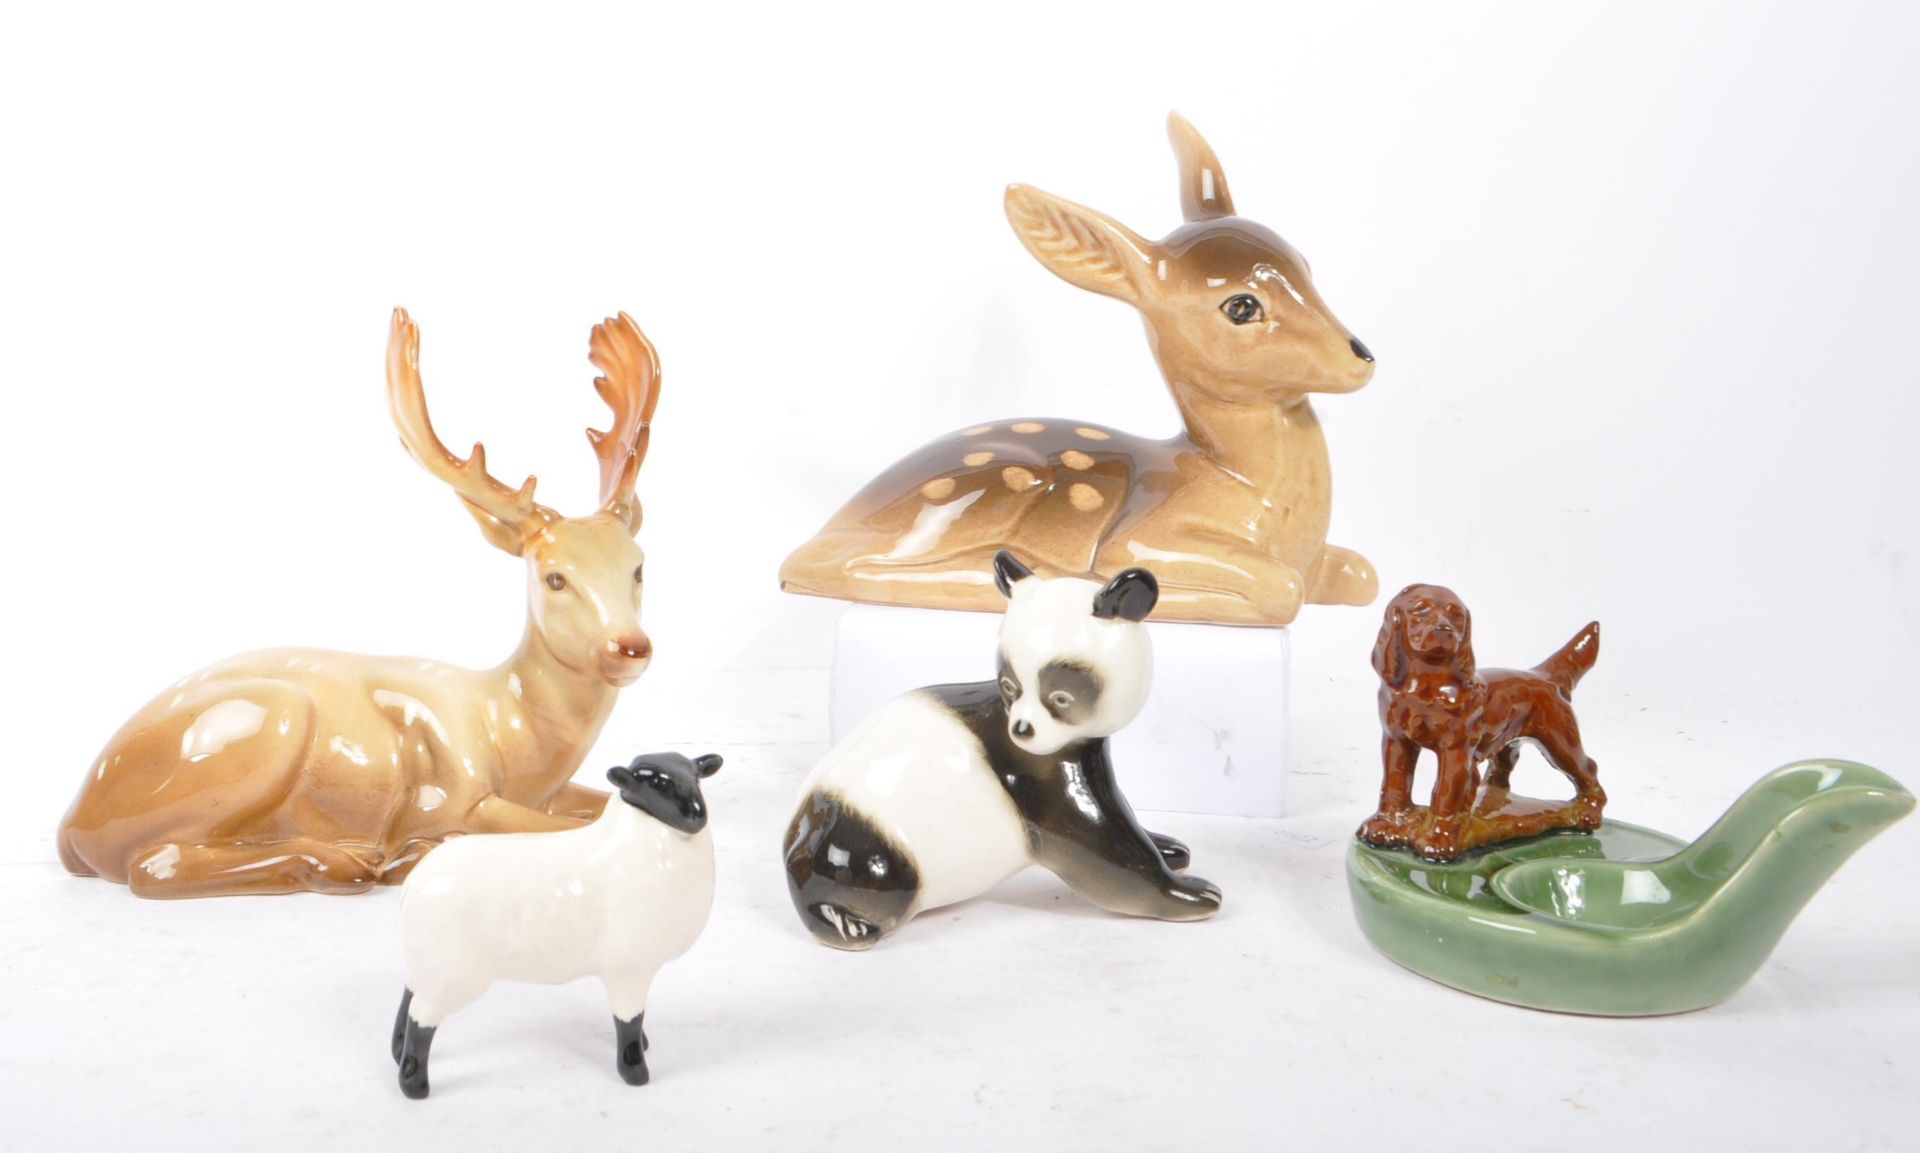 COLLECTION OF BESWICK WADE DUCHY CERAMIC PORCELAIN FIGURINES